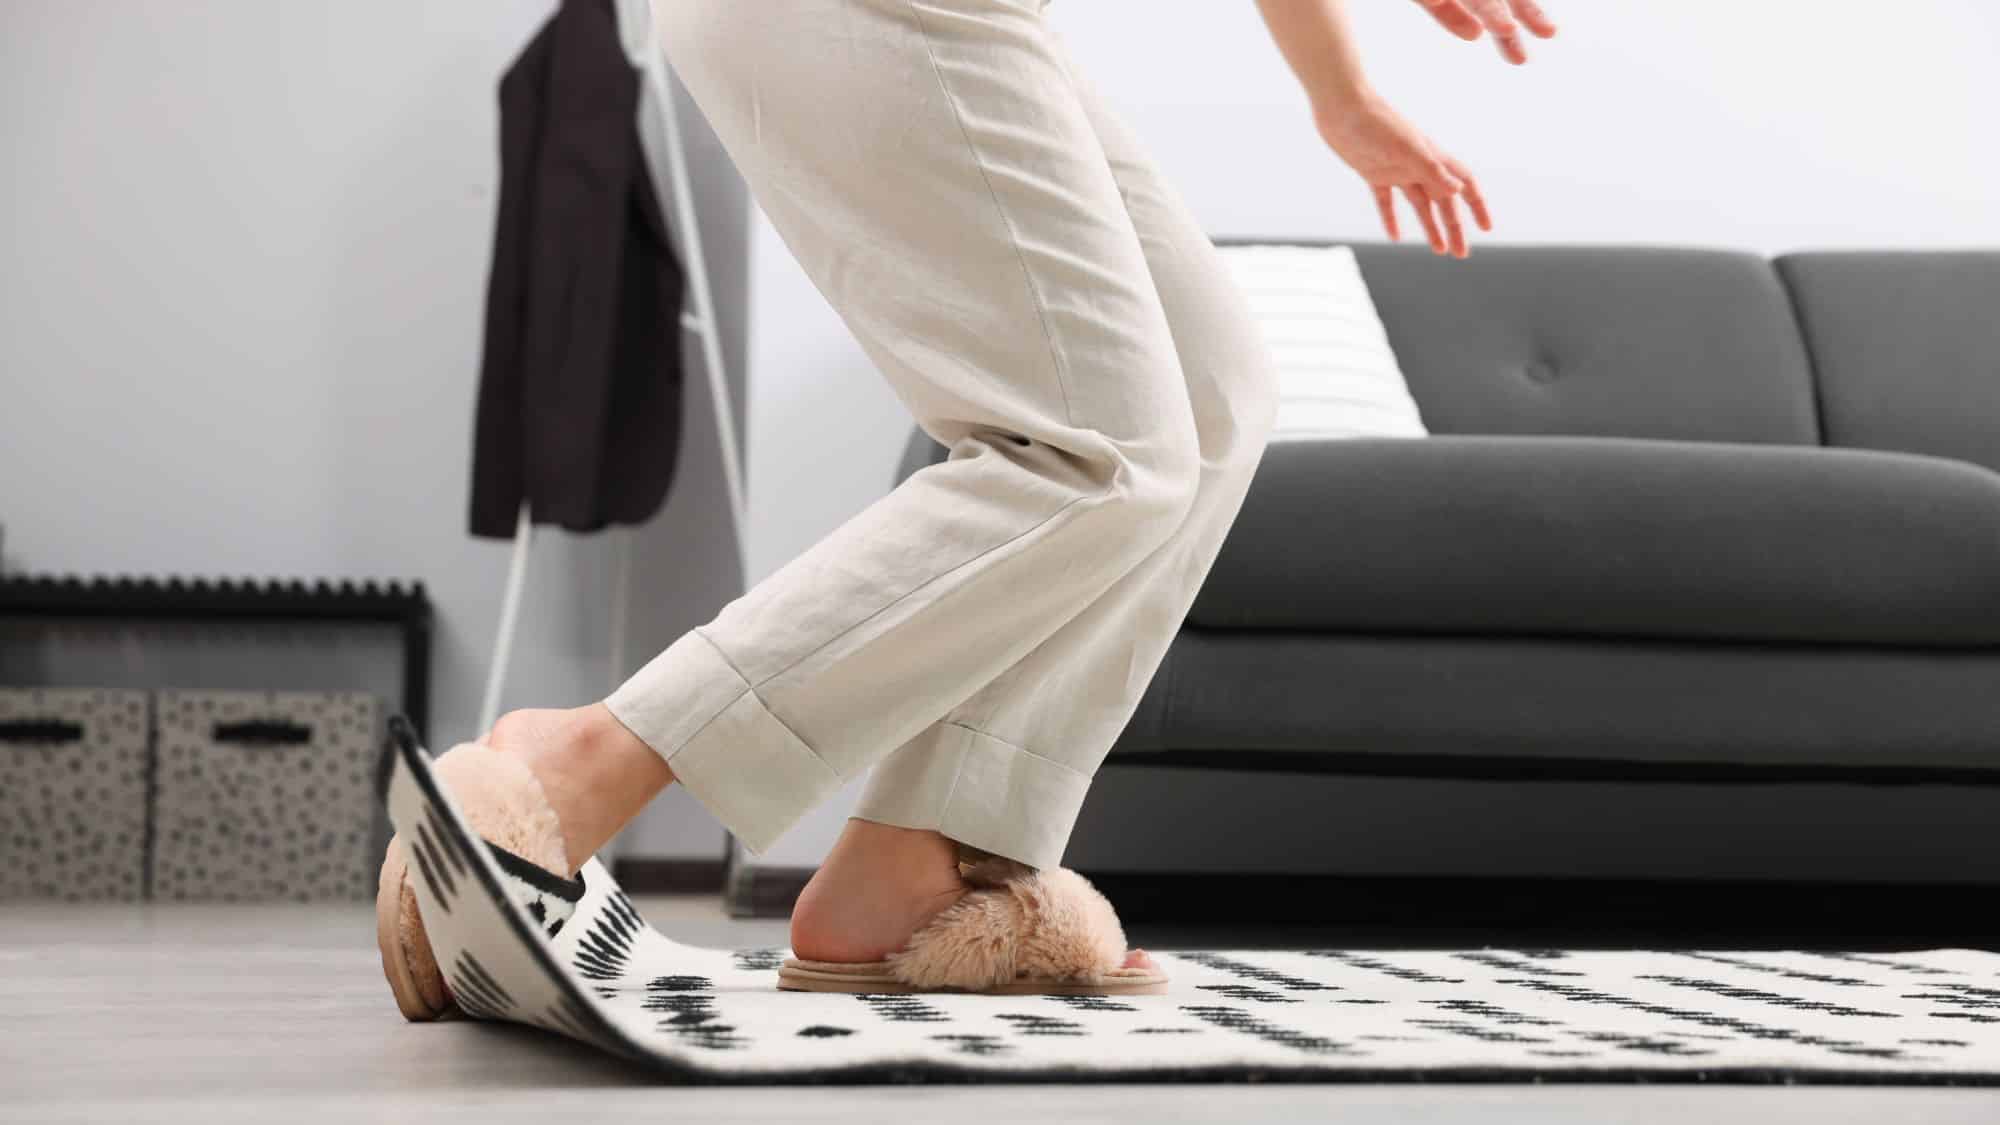 Person wearing slipper tripping on rug